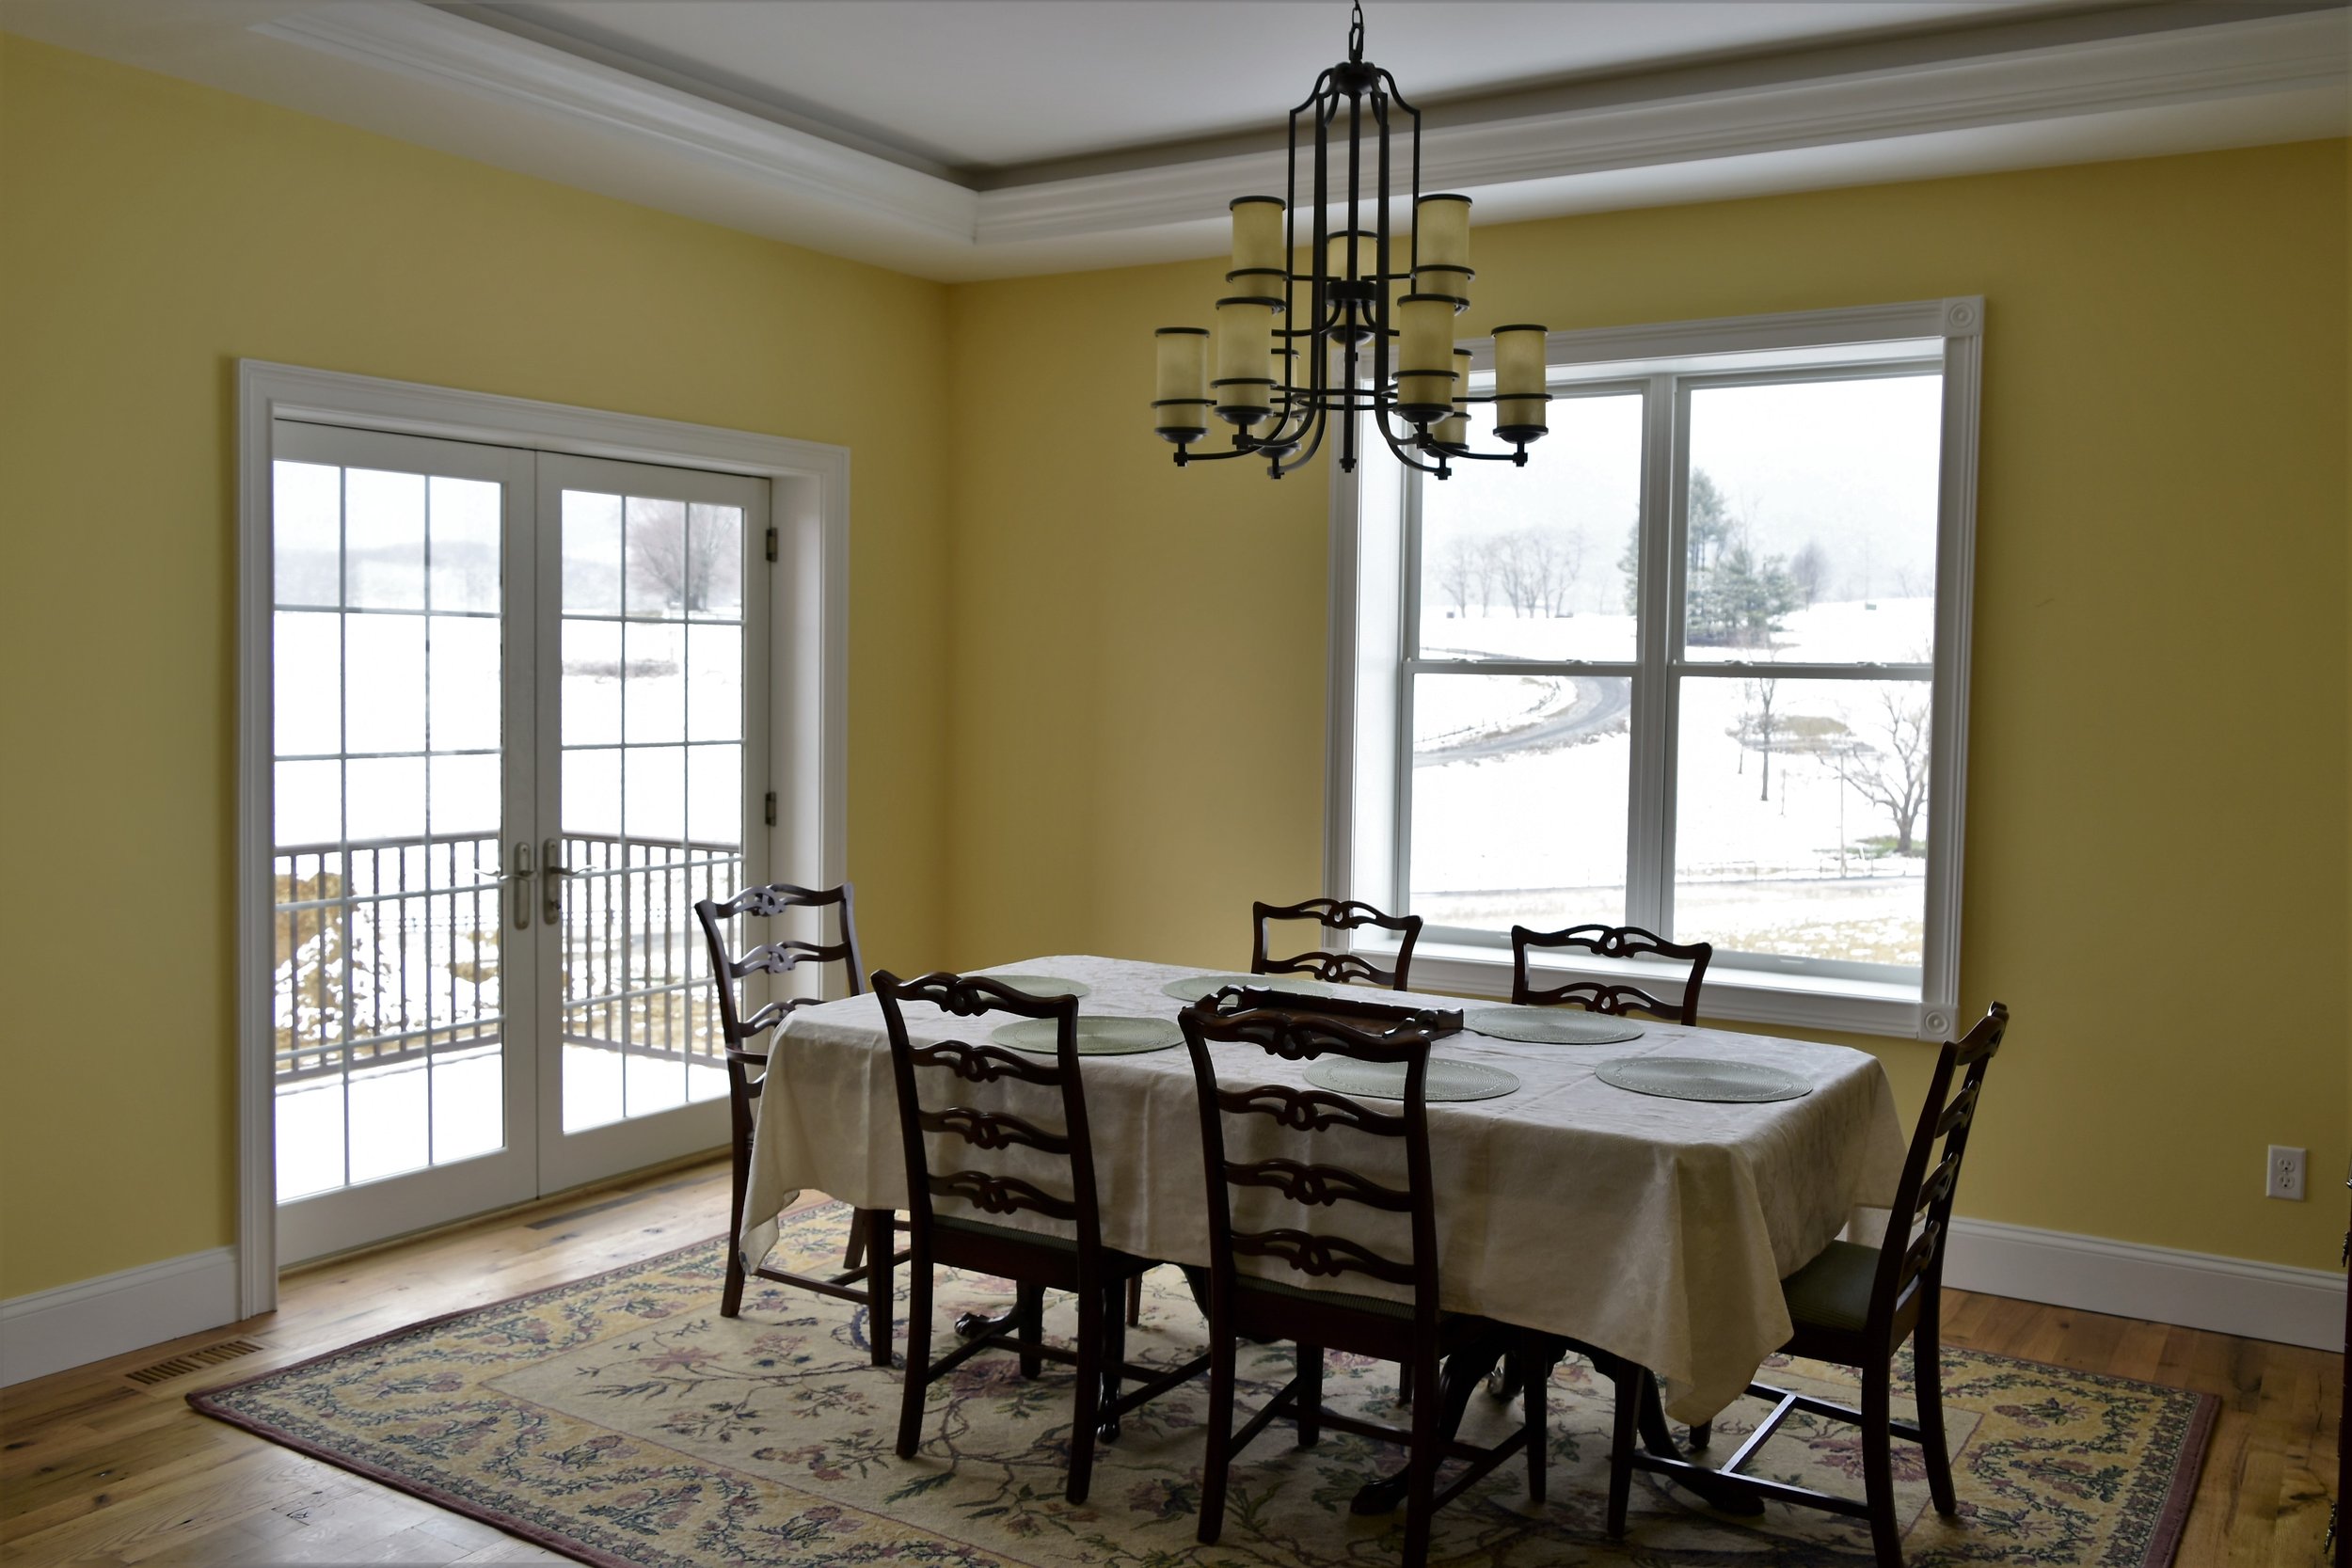 dining-room-with-french-doors-to-deck_25476996952_o.jpg